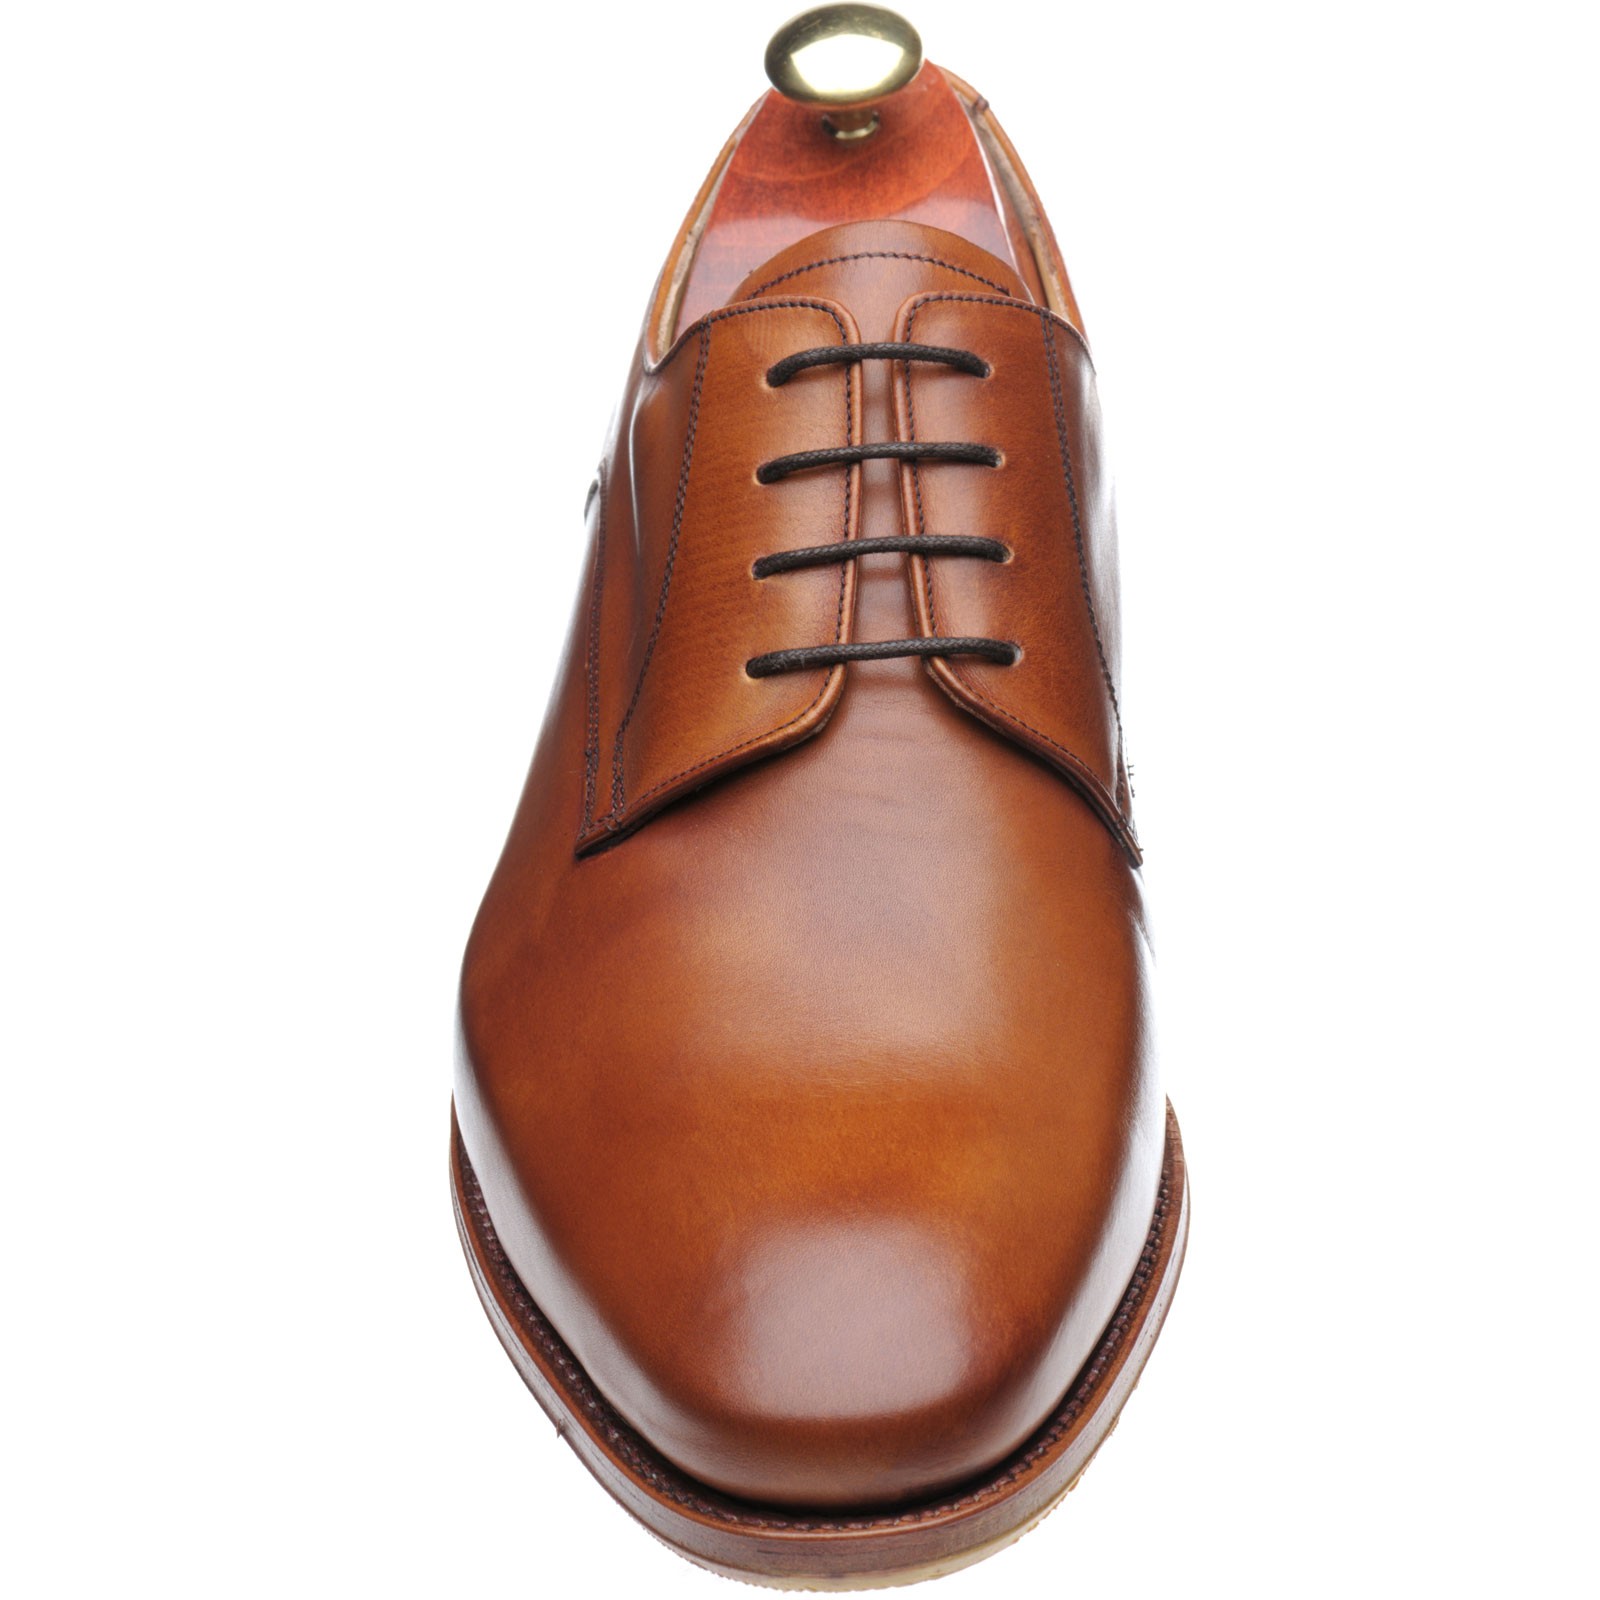 Barker shoes | Barker Tech | Ellon in Antique Rosewood at Herring Shoes